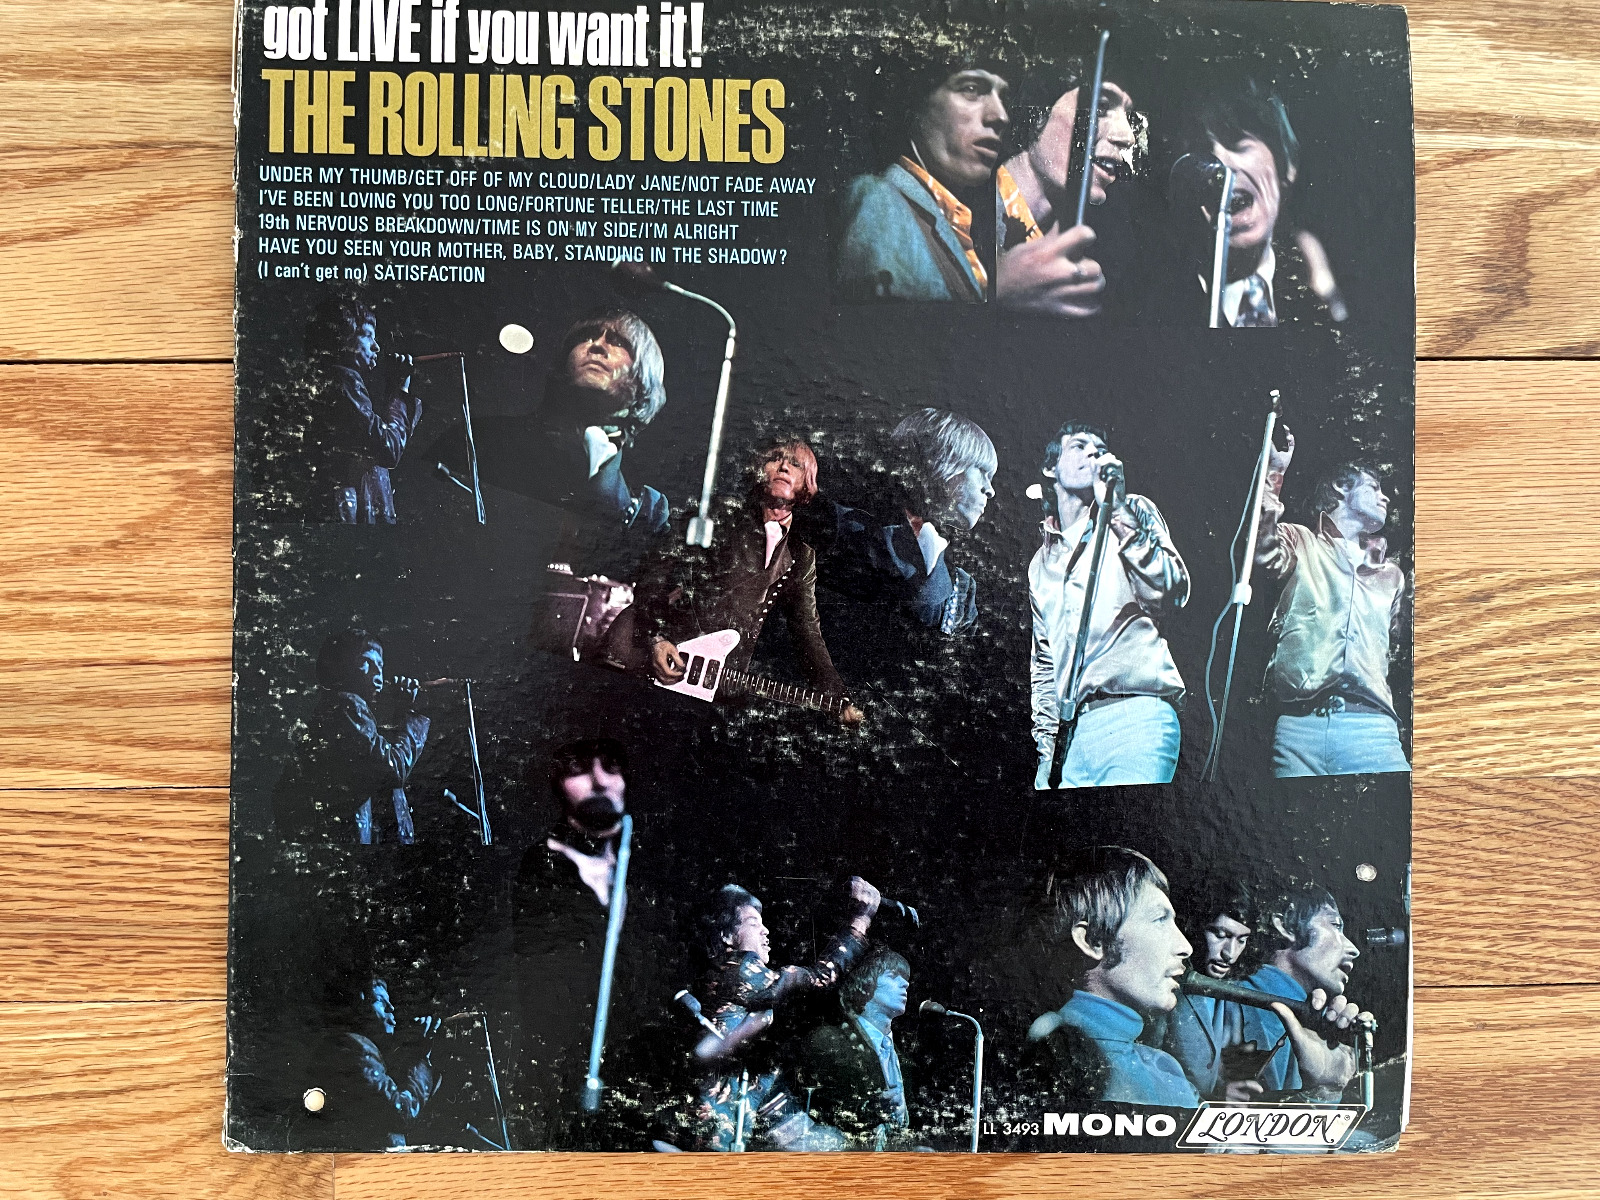 The Rolling Stones Got Live If You Want It! Vinyl LP London Records LL-3493